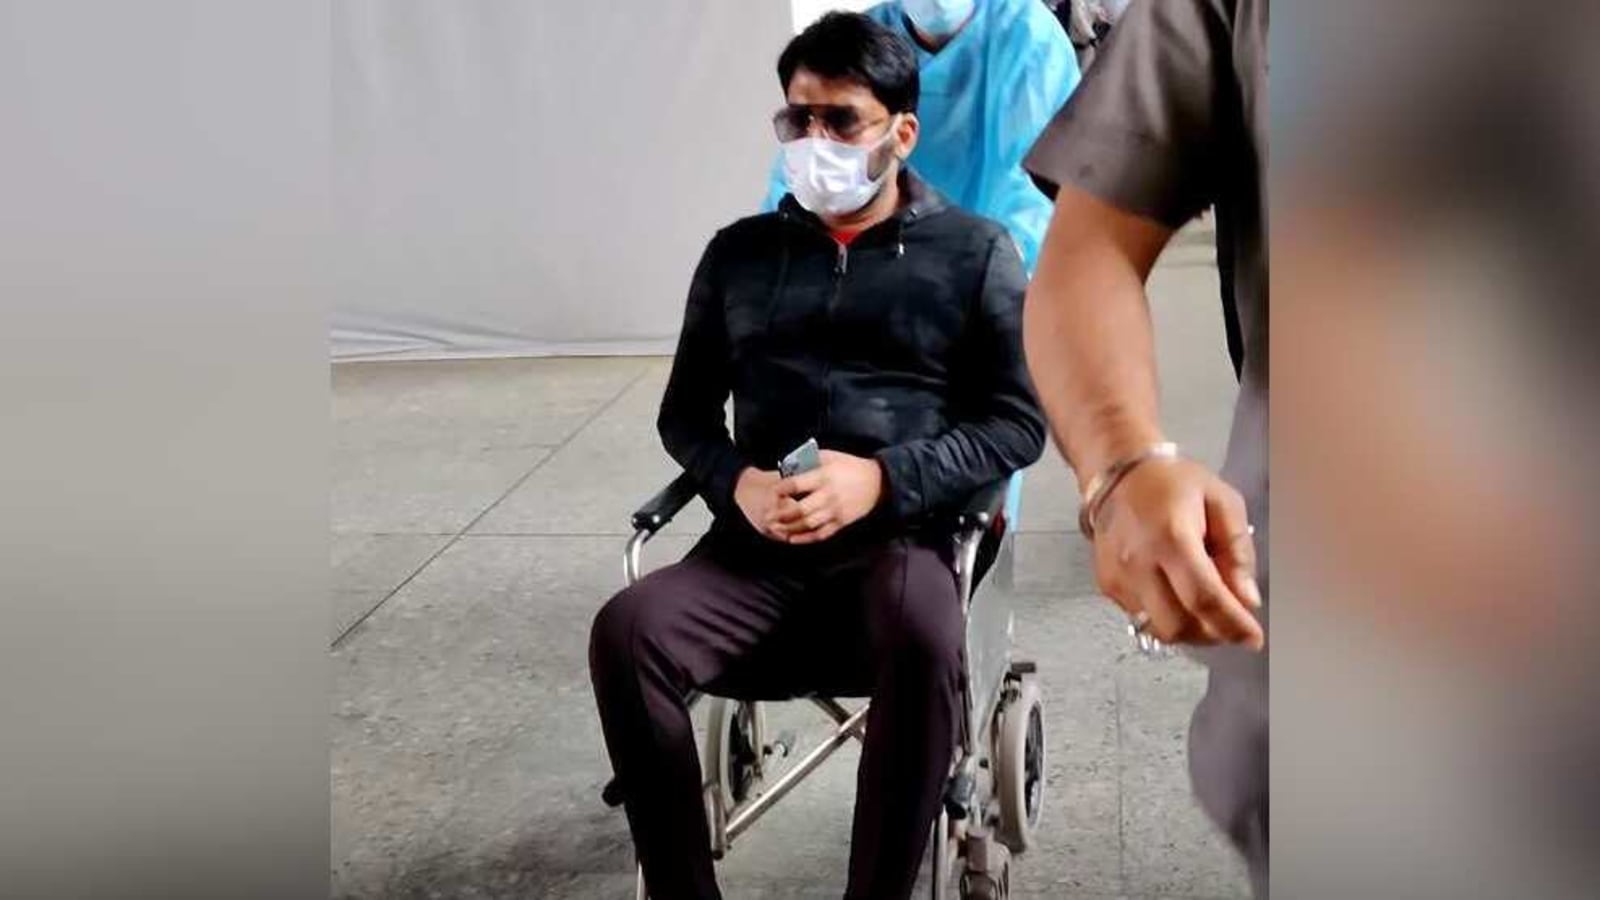 Kapil Sharma Snaps At Paparazzi As They Rush To Photograph Him On Wheelchair They Object To Him Swearing At Them Watch Hindustan Times